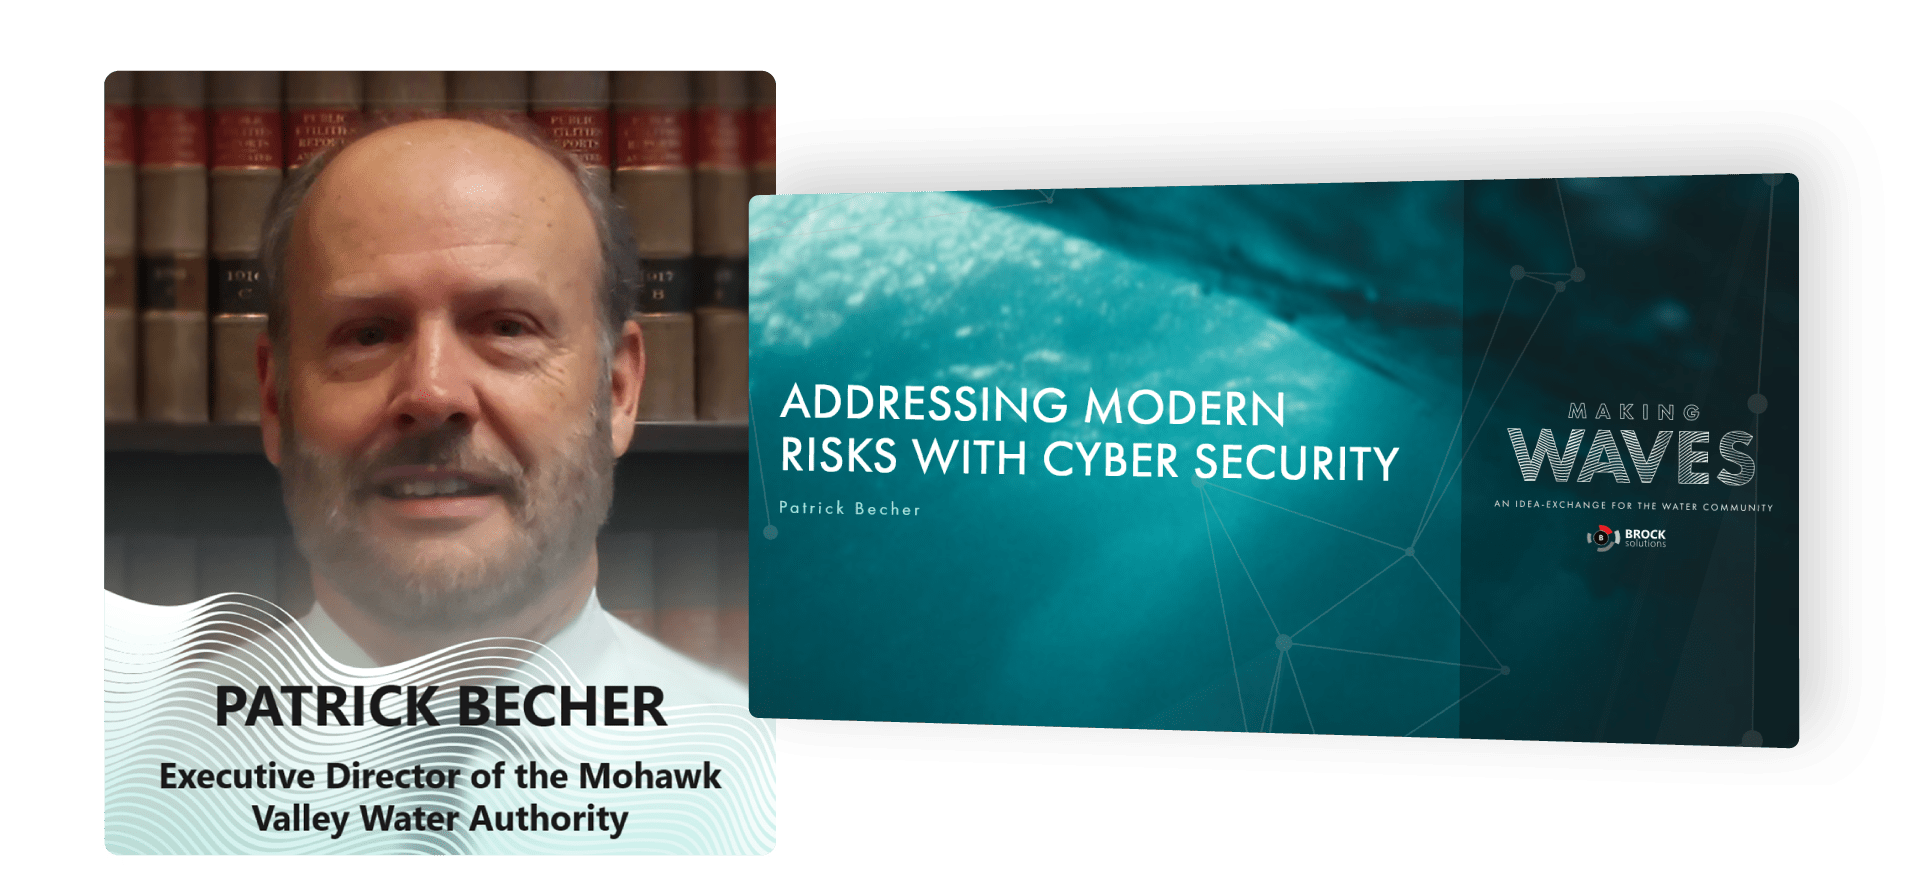 Pet Becher, Executive Director of Mohawk Valley Water Authority Addresses modern risks with cyber security